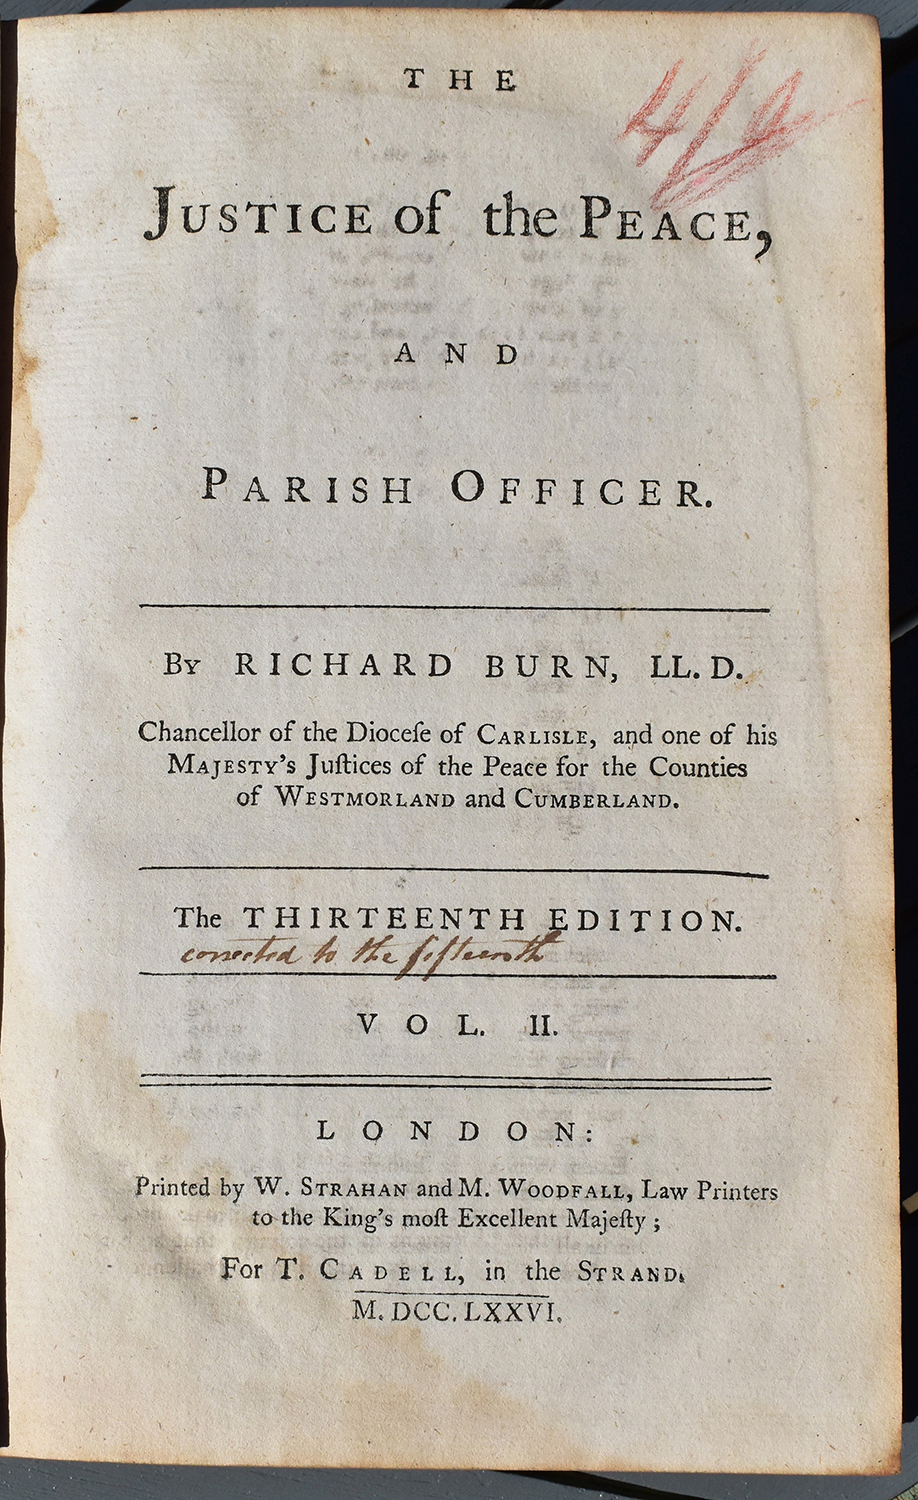 The title page of volume 2 of the 13th edition of Justice of the Peace, dating from 1776 -Pictures by Nell Darby 